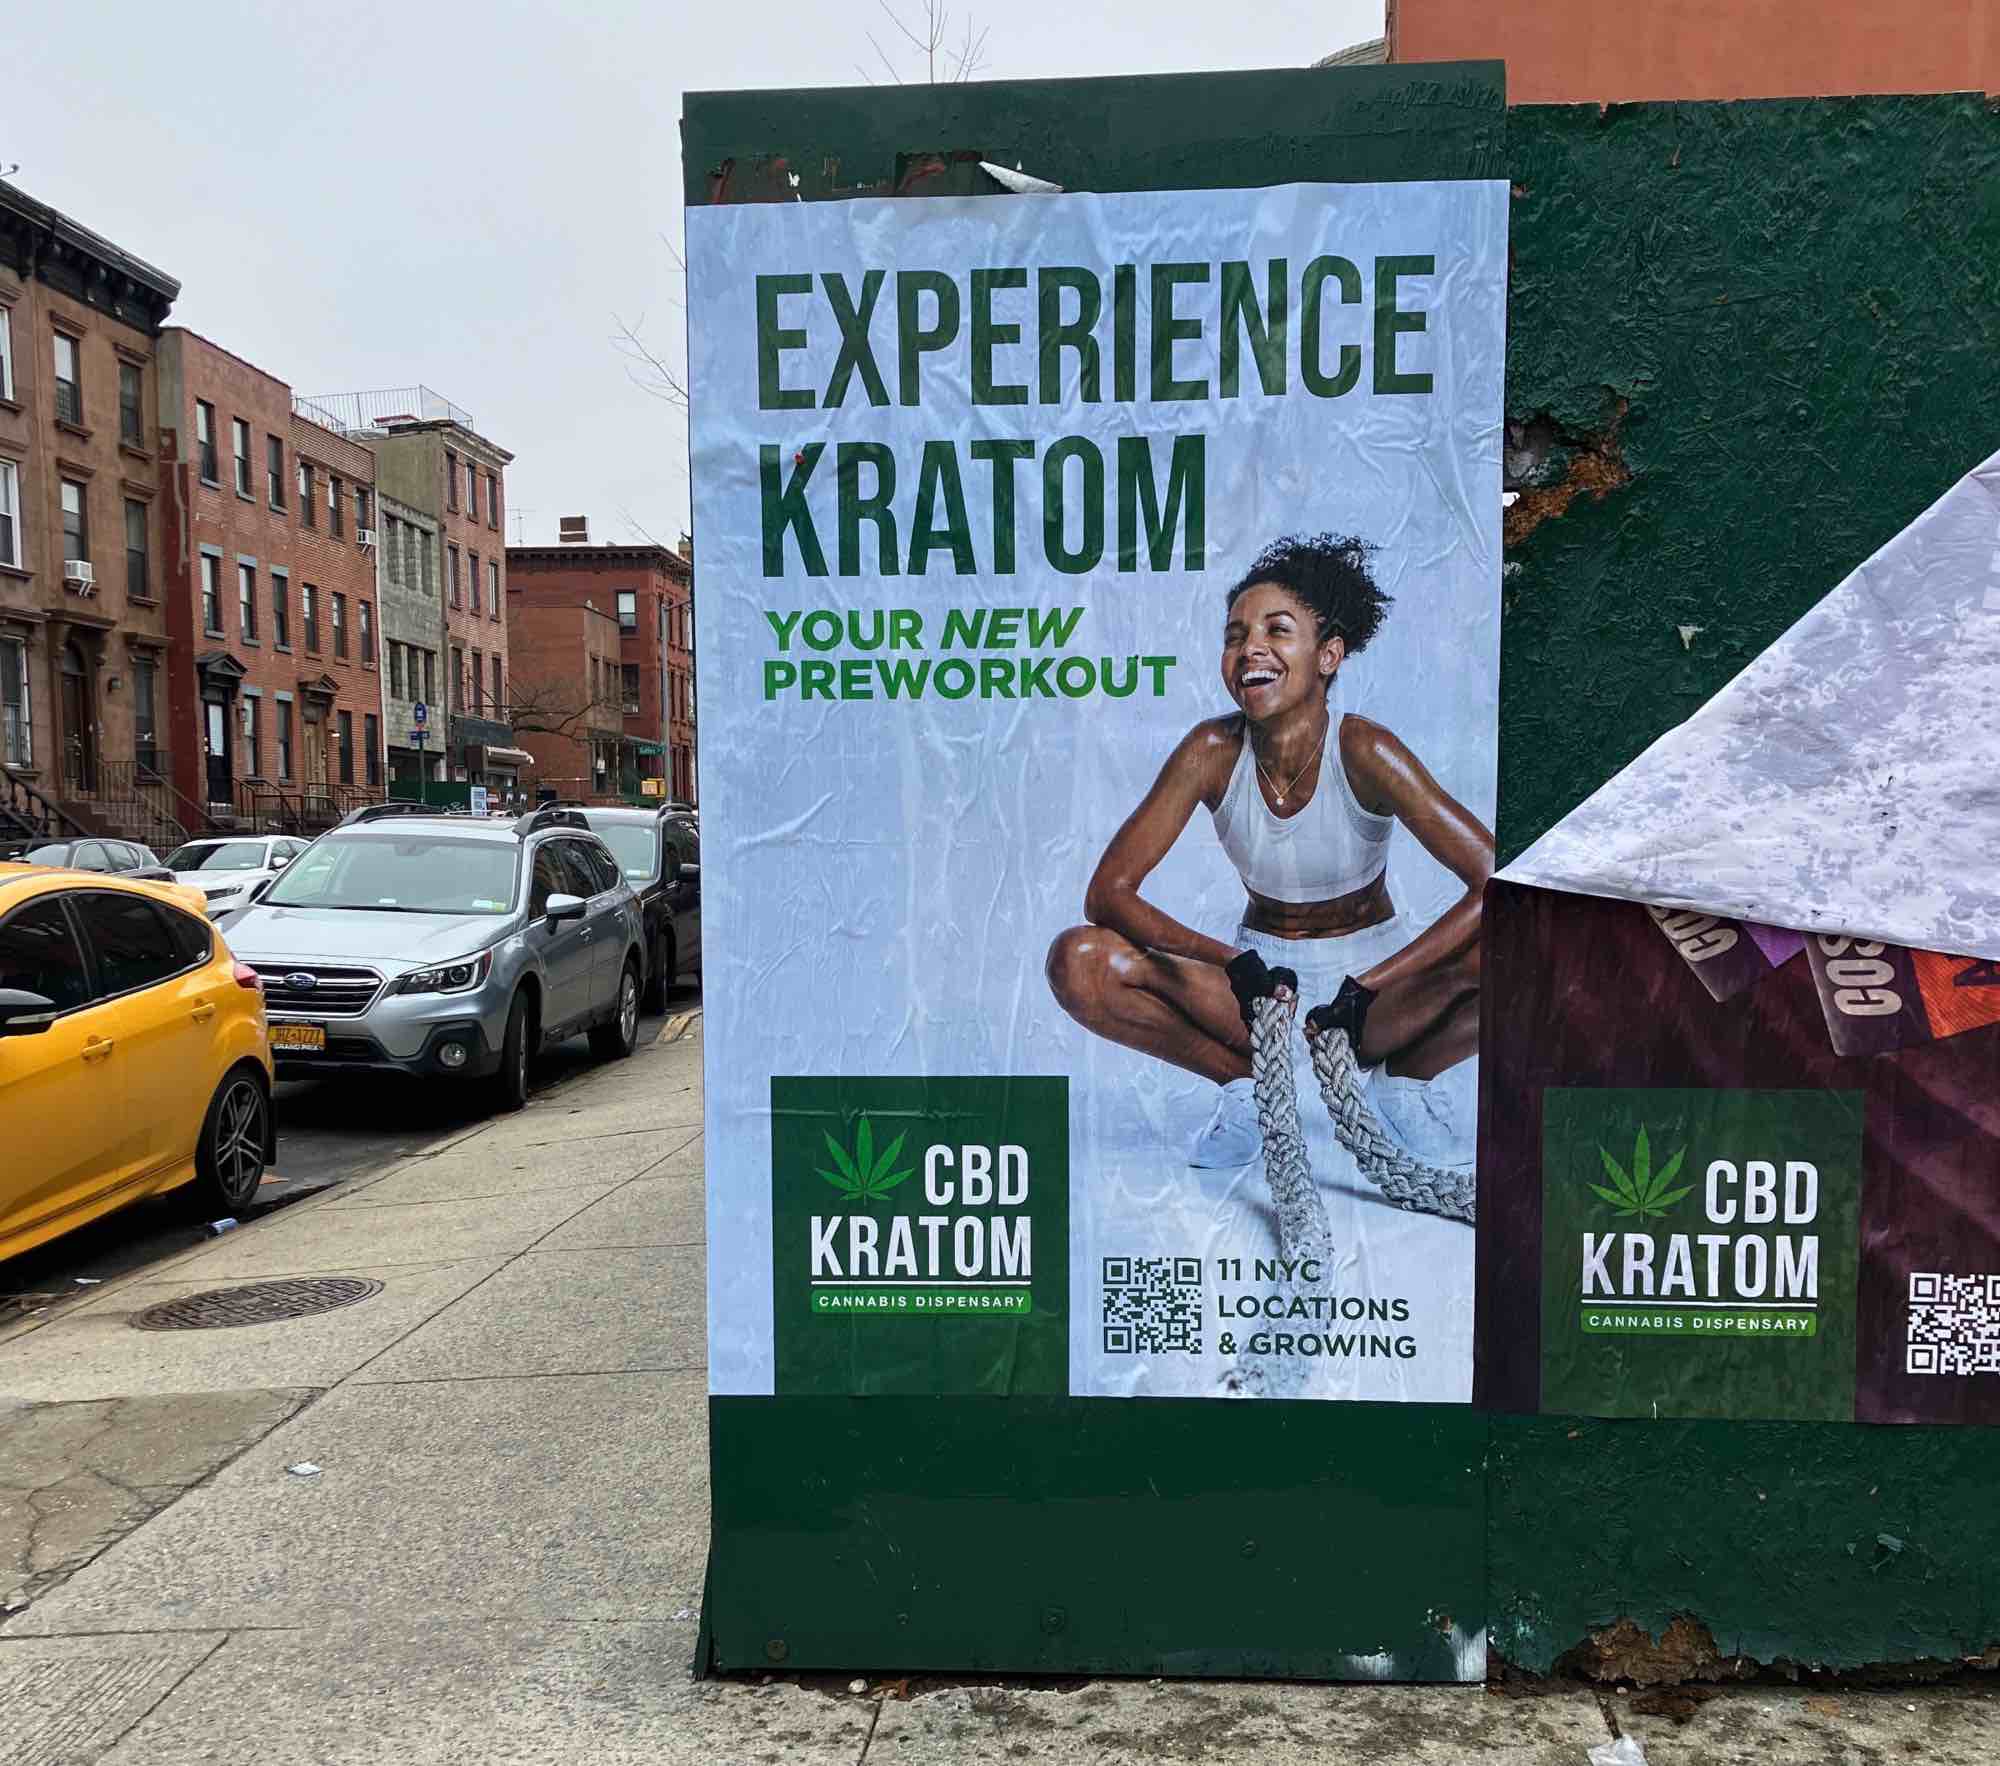 A wheatpaste ad for "CBD Kratom" as "Your new preworkout" with a woman in workout gear squatting next to the ad copy.